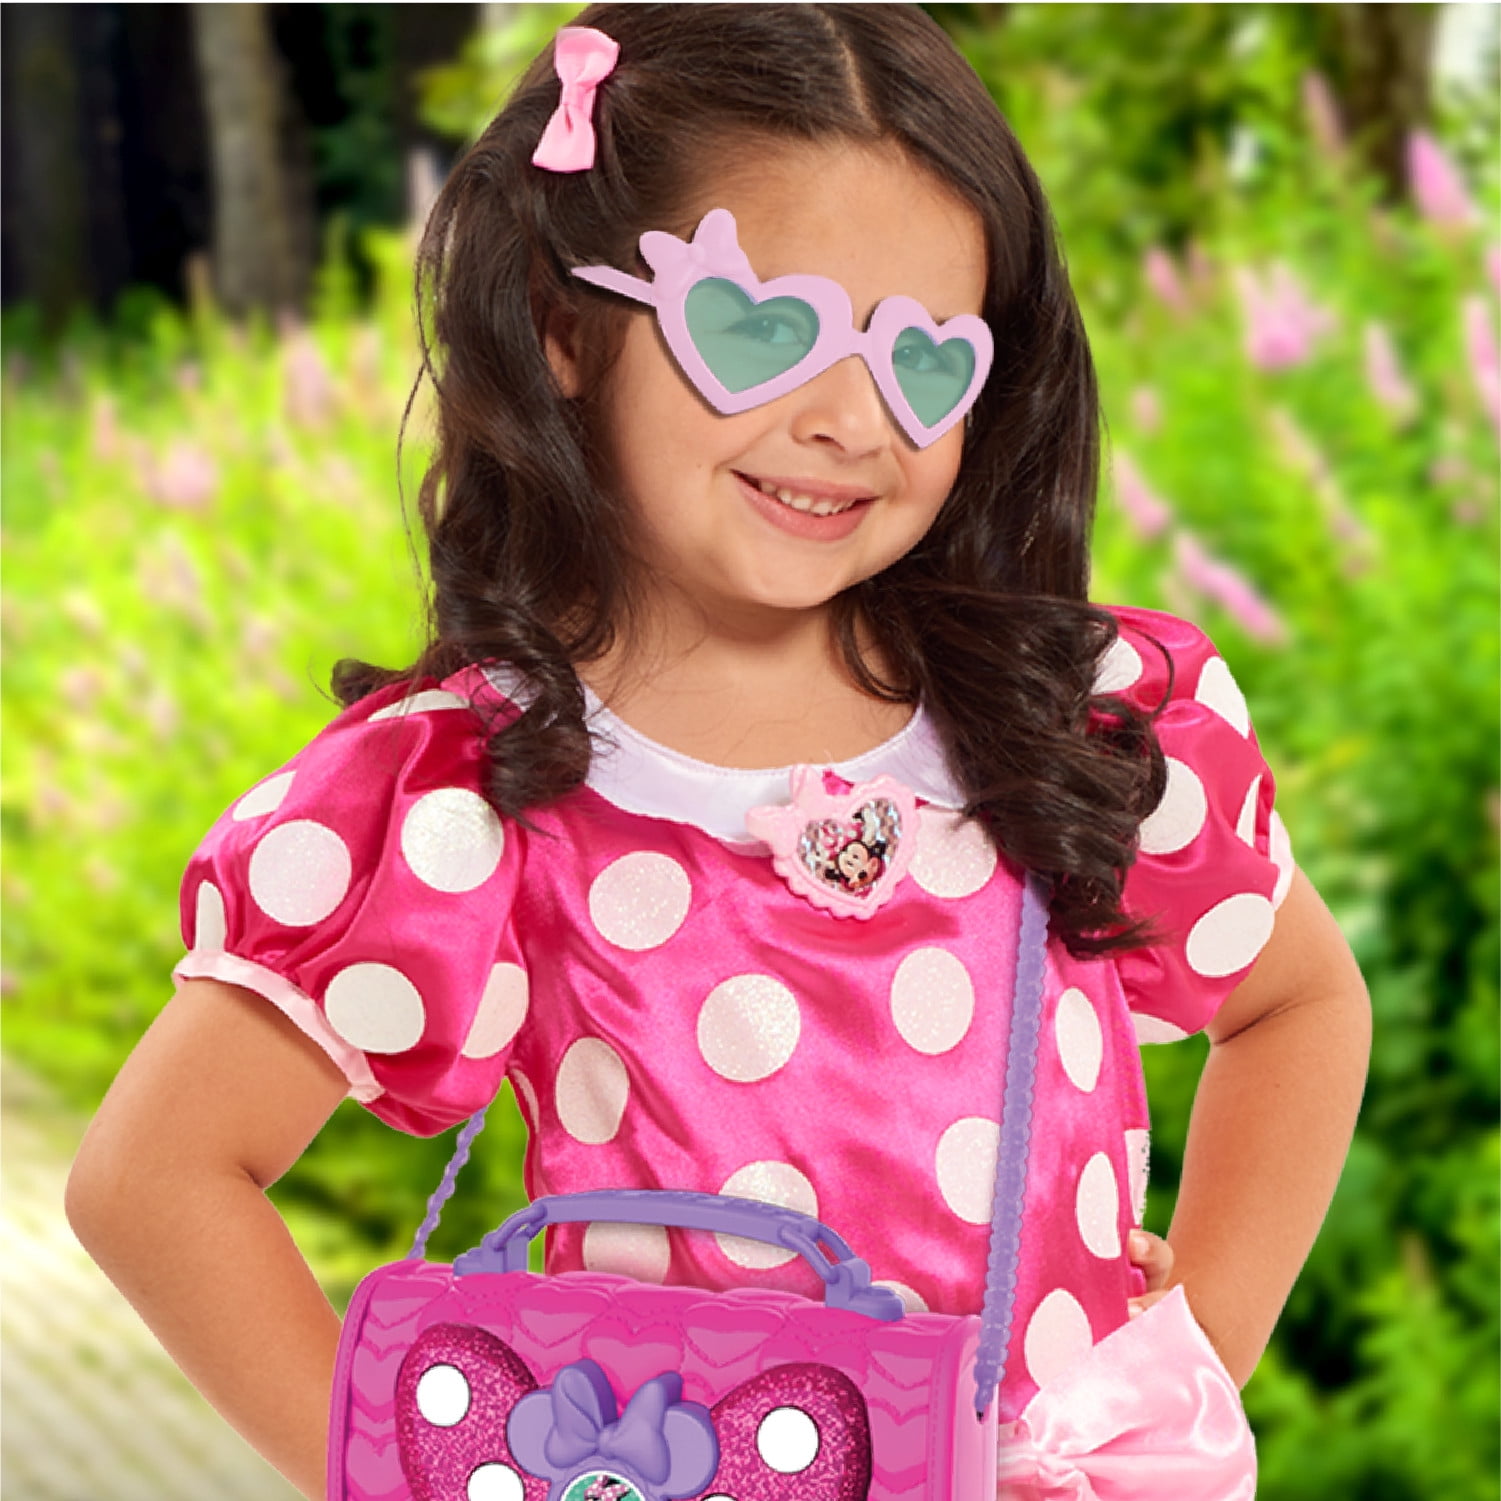 Disney Junior Minnie Mouse Bowfabulous Bag Set, 9-pieces, Dress Up and Pretend Play, Kids Toys for Ages 3 up